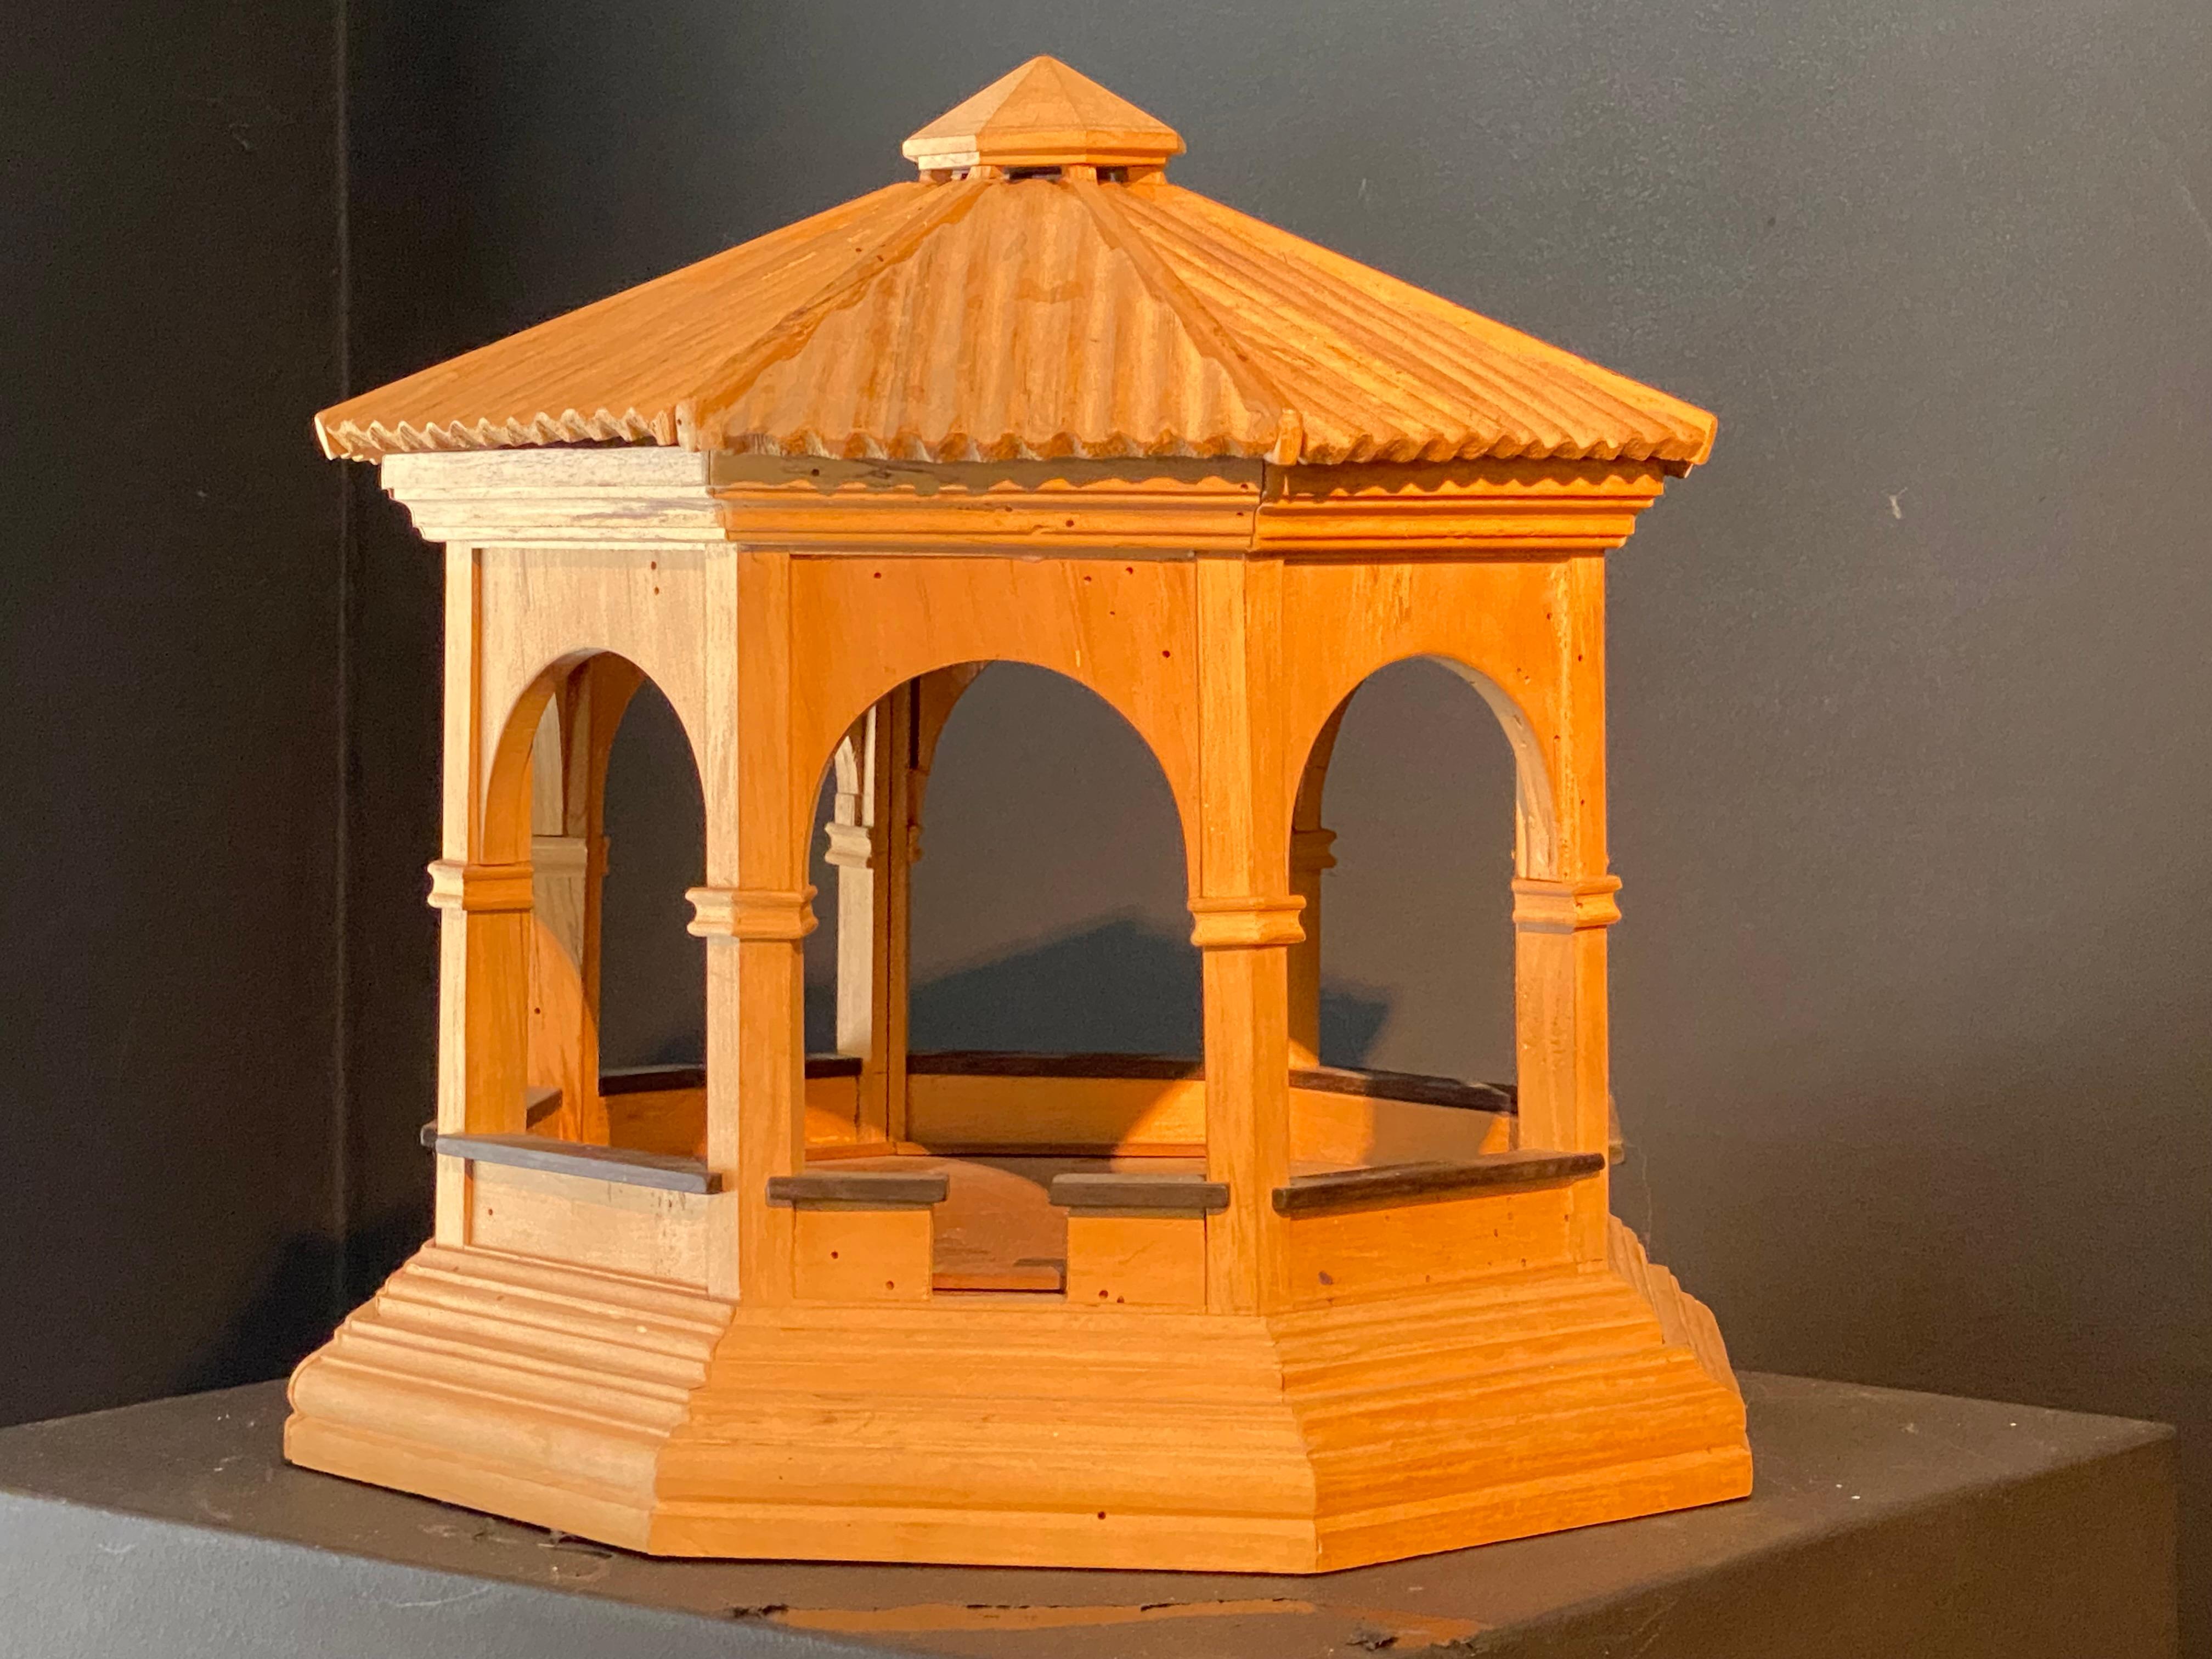 Small Wooden Vintage Architects Model of a Wooden Kiosk 2